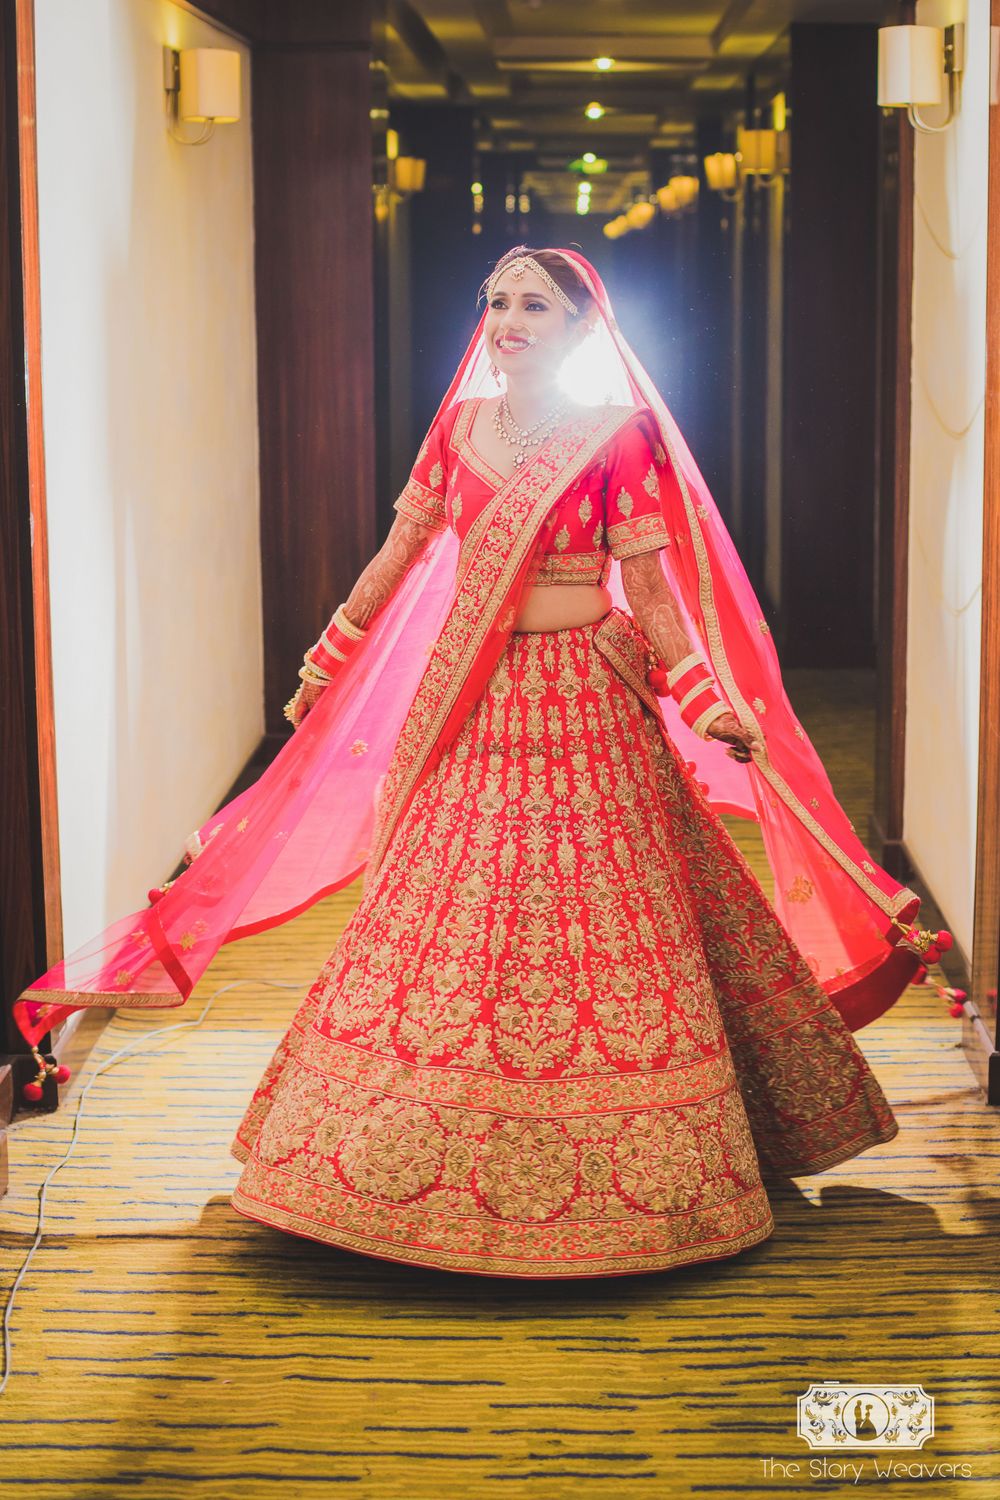 Photo of Bride Twirling in Bright Pink Lehenga with Gold Work